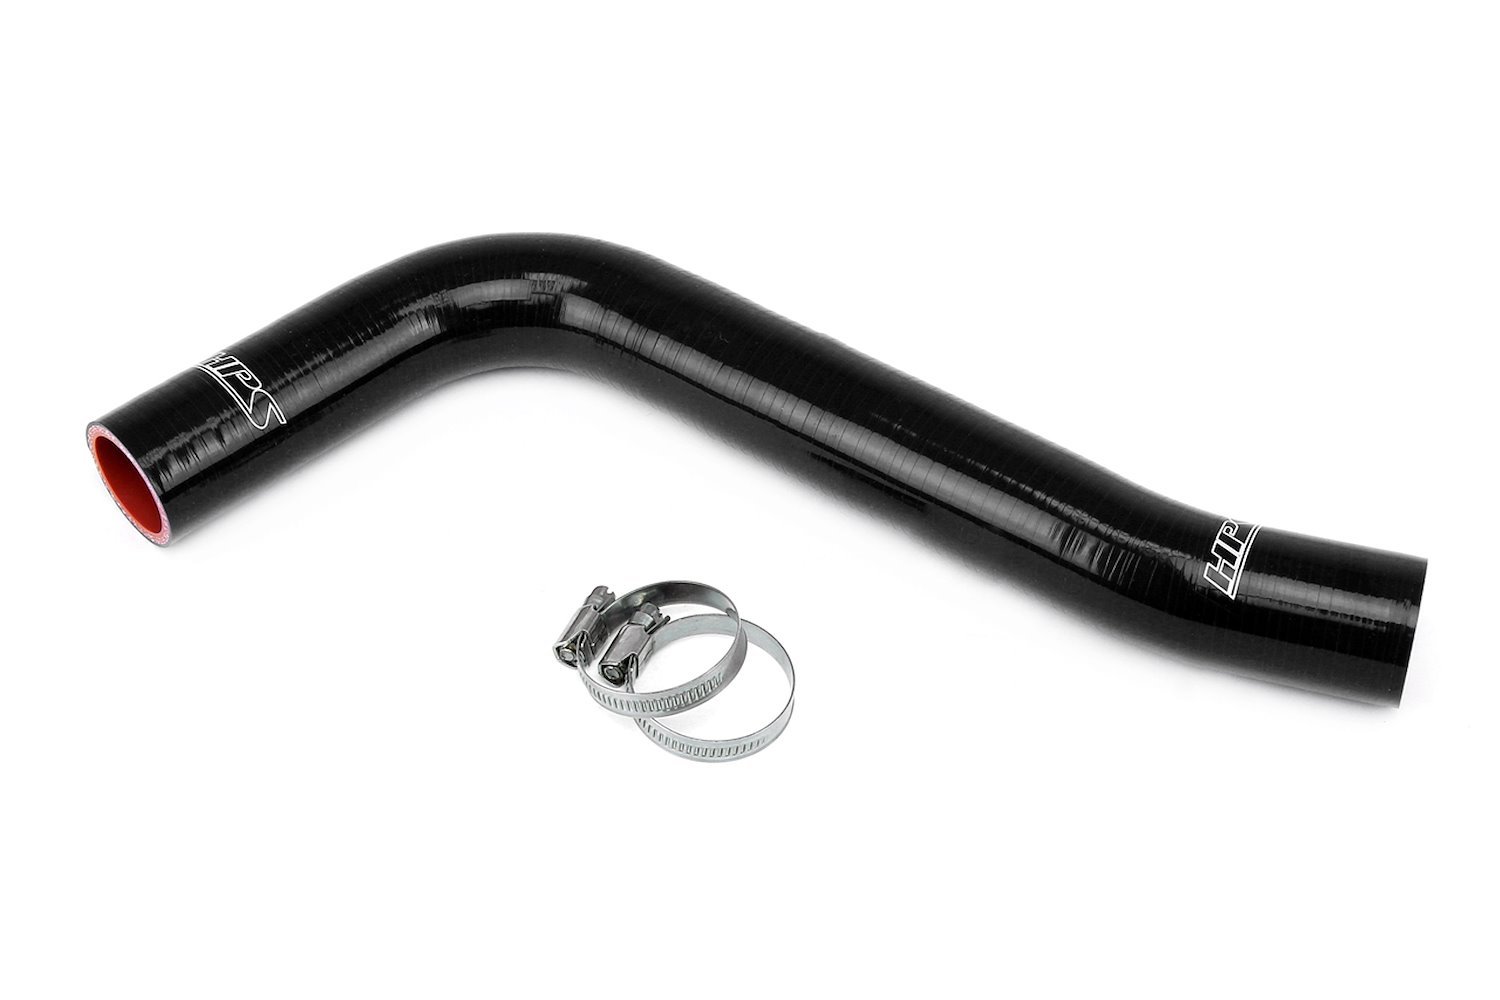 57-1215U-BLK Radiator Hose Kit, 3-Ply Reinforced Silicone, Replaces Upper Rubber Radiator Coolant Hose.